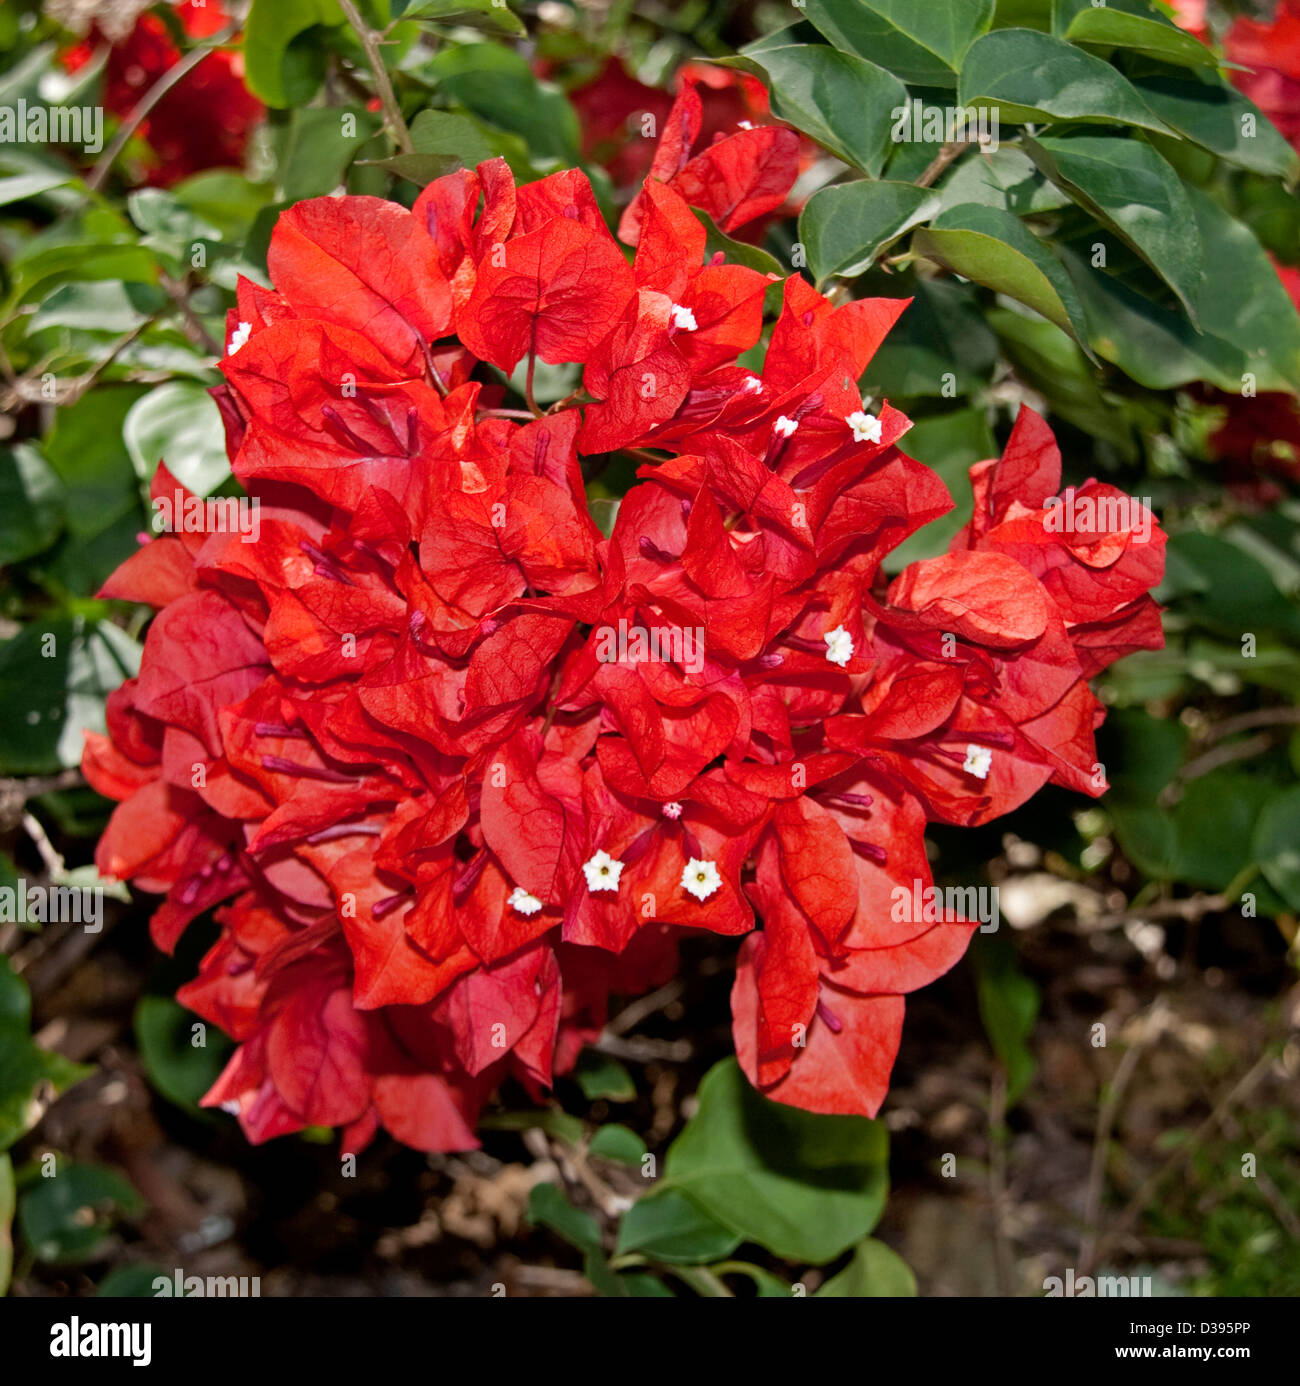 Cluster of brilliant red bracts of bambino Bougainvillea 'Jazzi' surrounding tiny white flowers and with dark green foliage Stock Photo